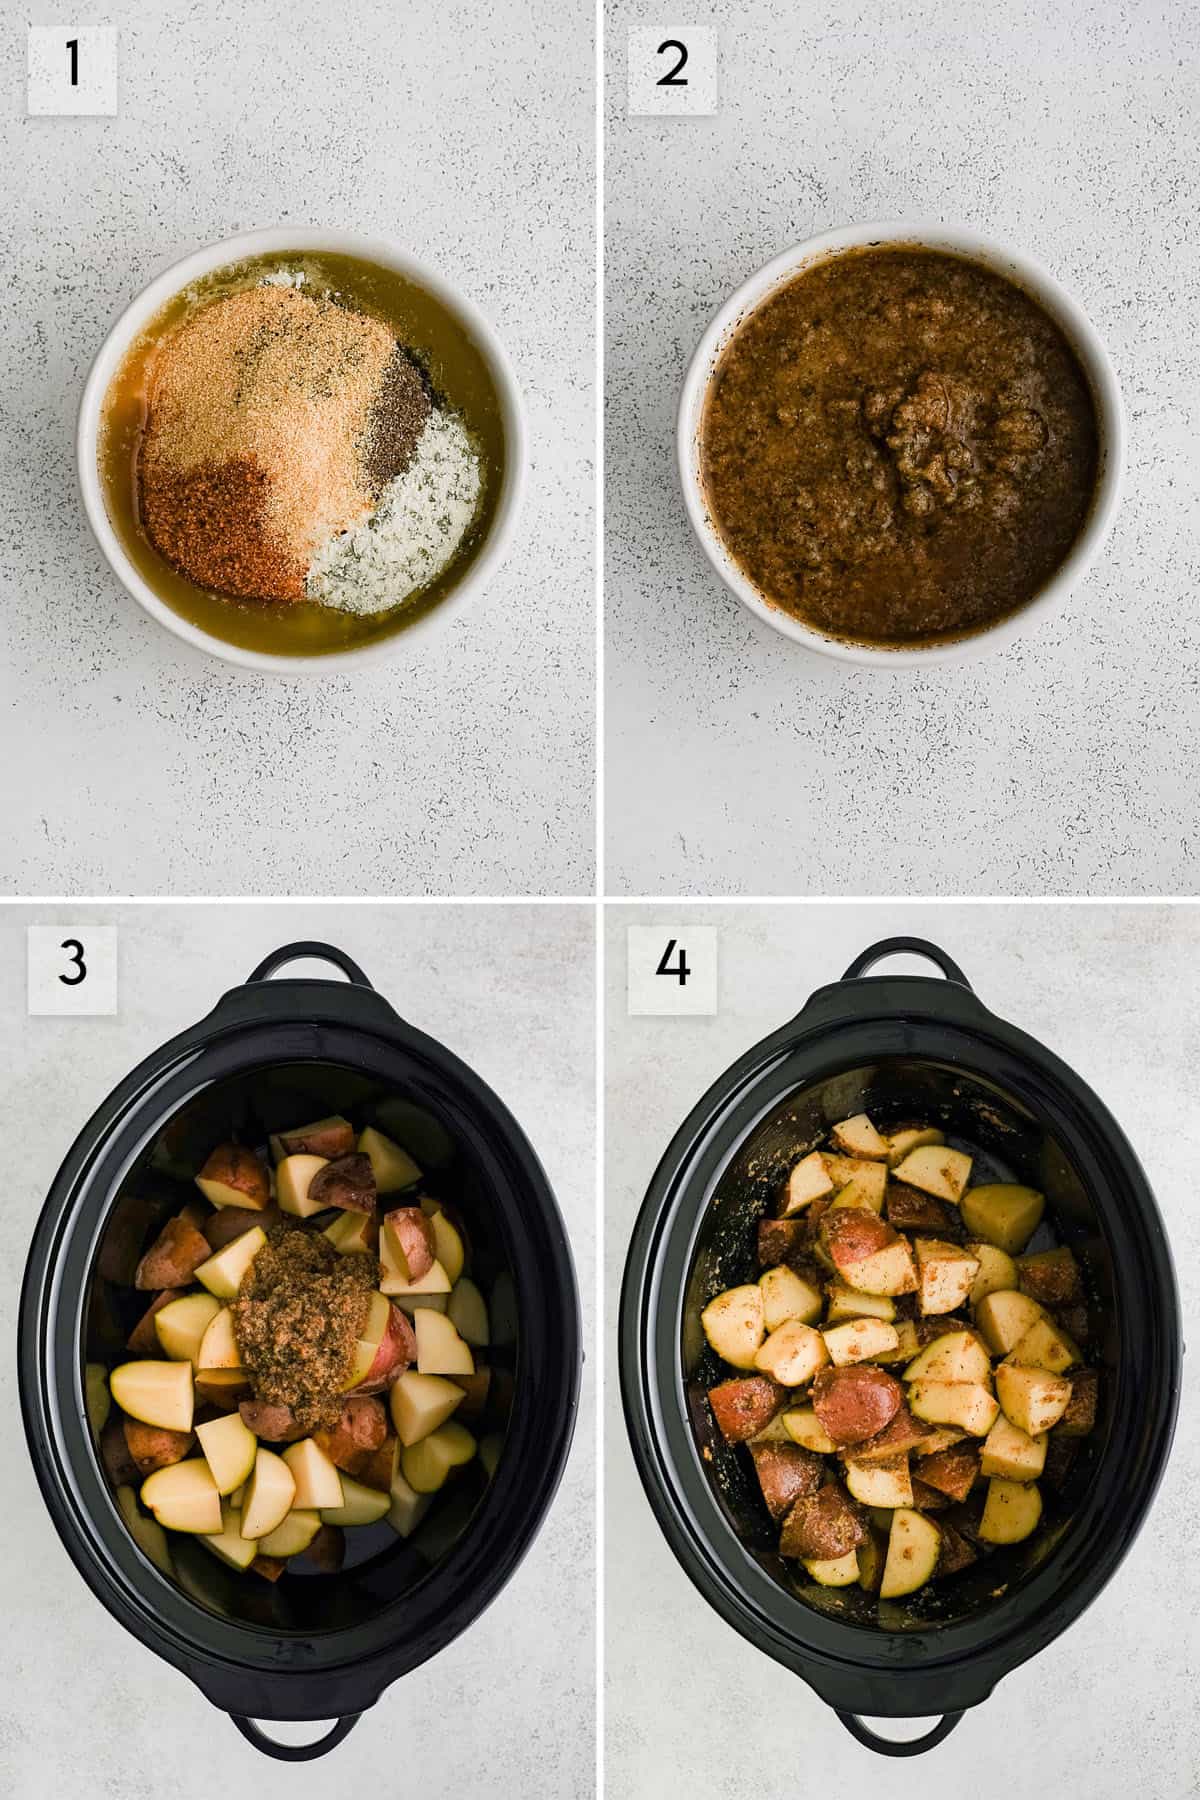 four panel collage image showing the different steps of making crockpot potatoes